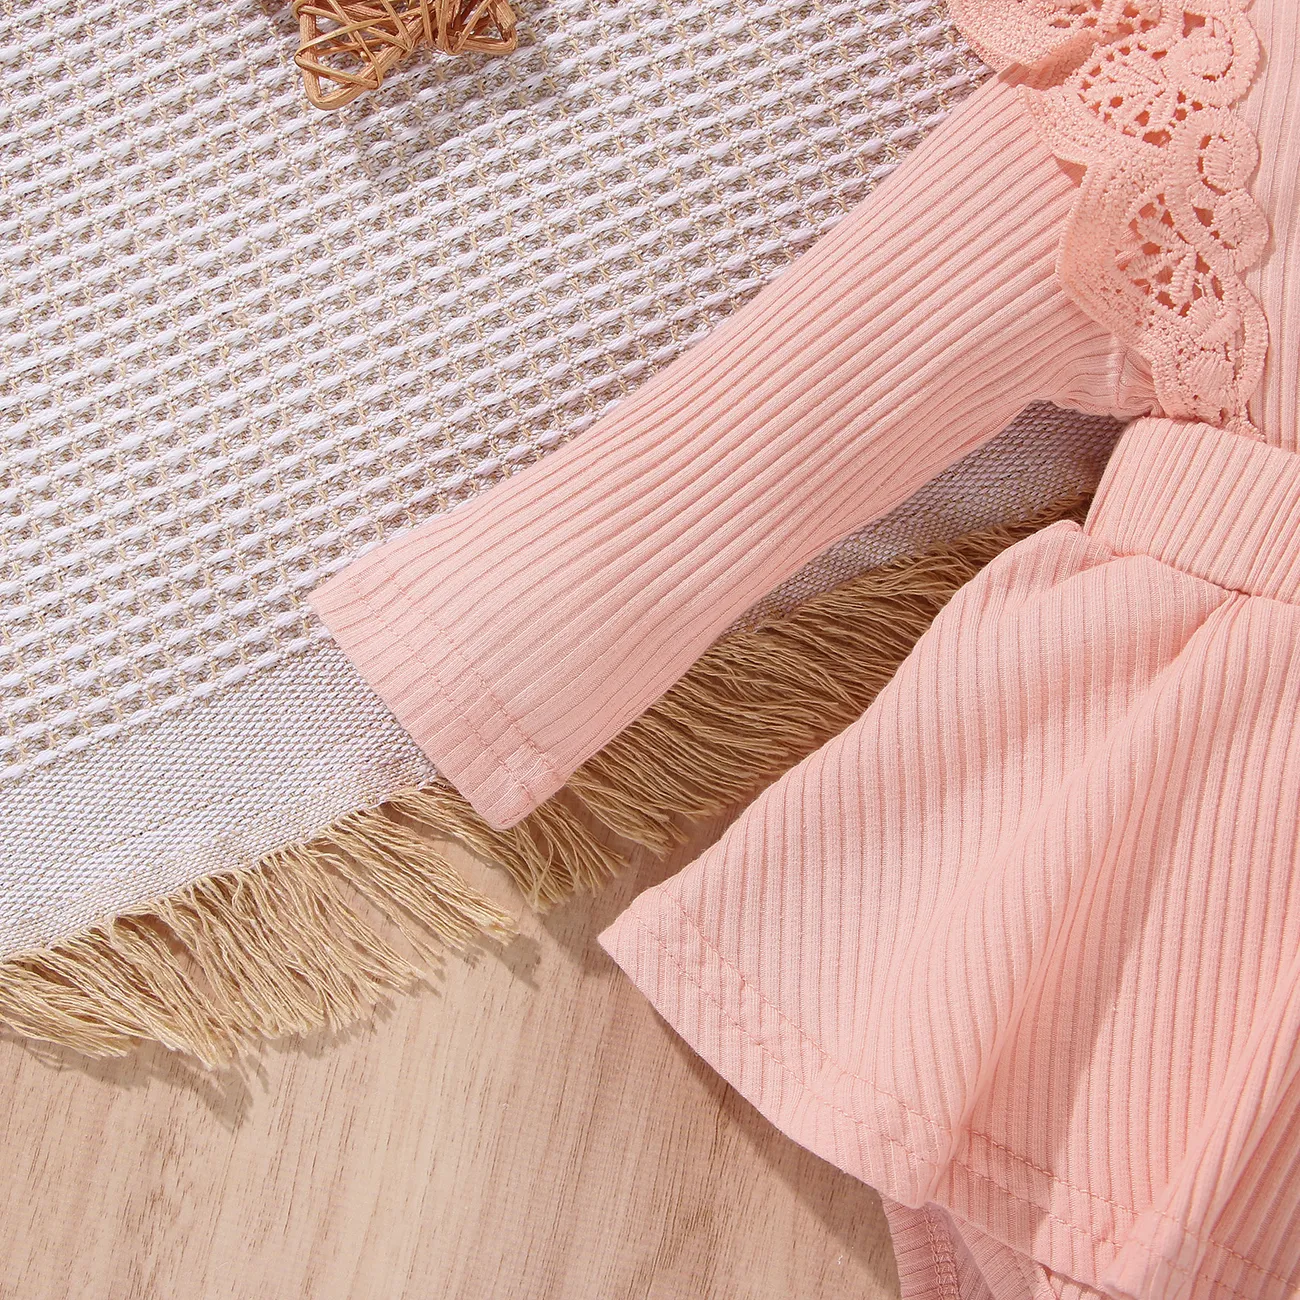 2pcs Baby Girl Solid Rib Knit Spliced Lace Long-sleeve Romper with Headband Set Pink big image 1